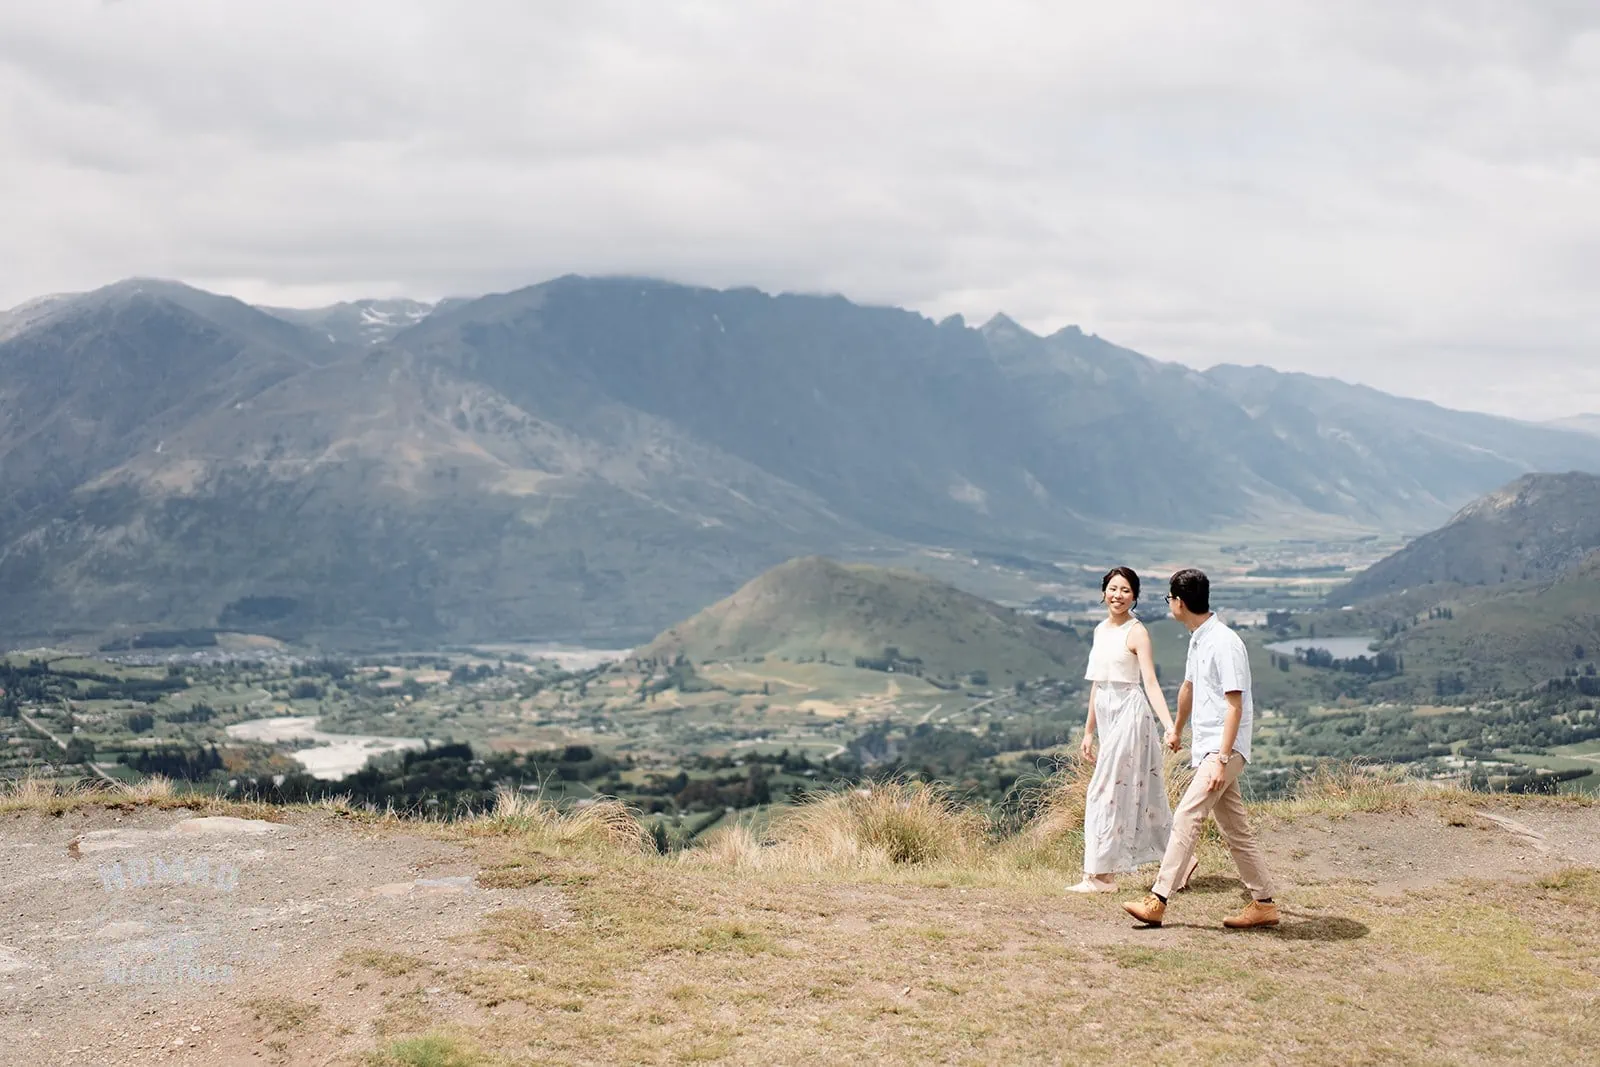 Queenstown New Zealand Elopement Wedding Photographer - A couple on a hill with mountains in the background in Queenstown.